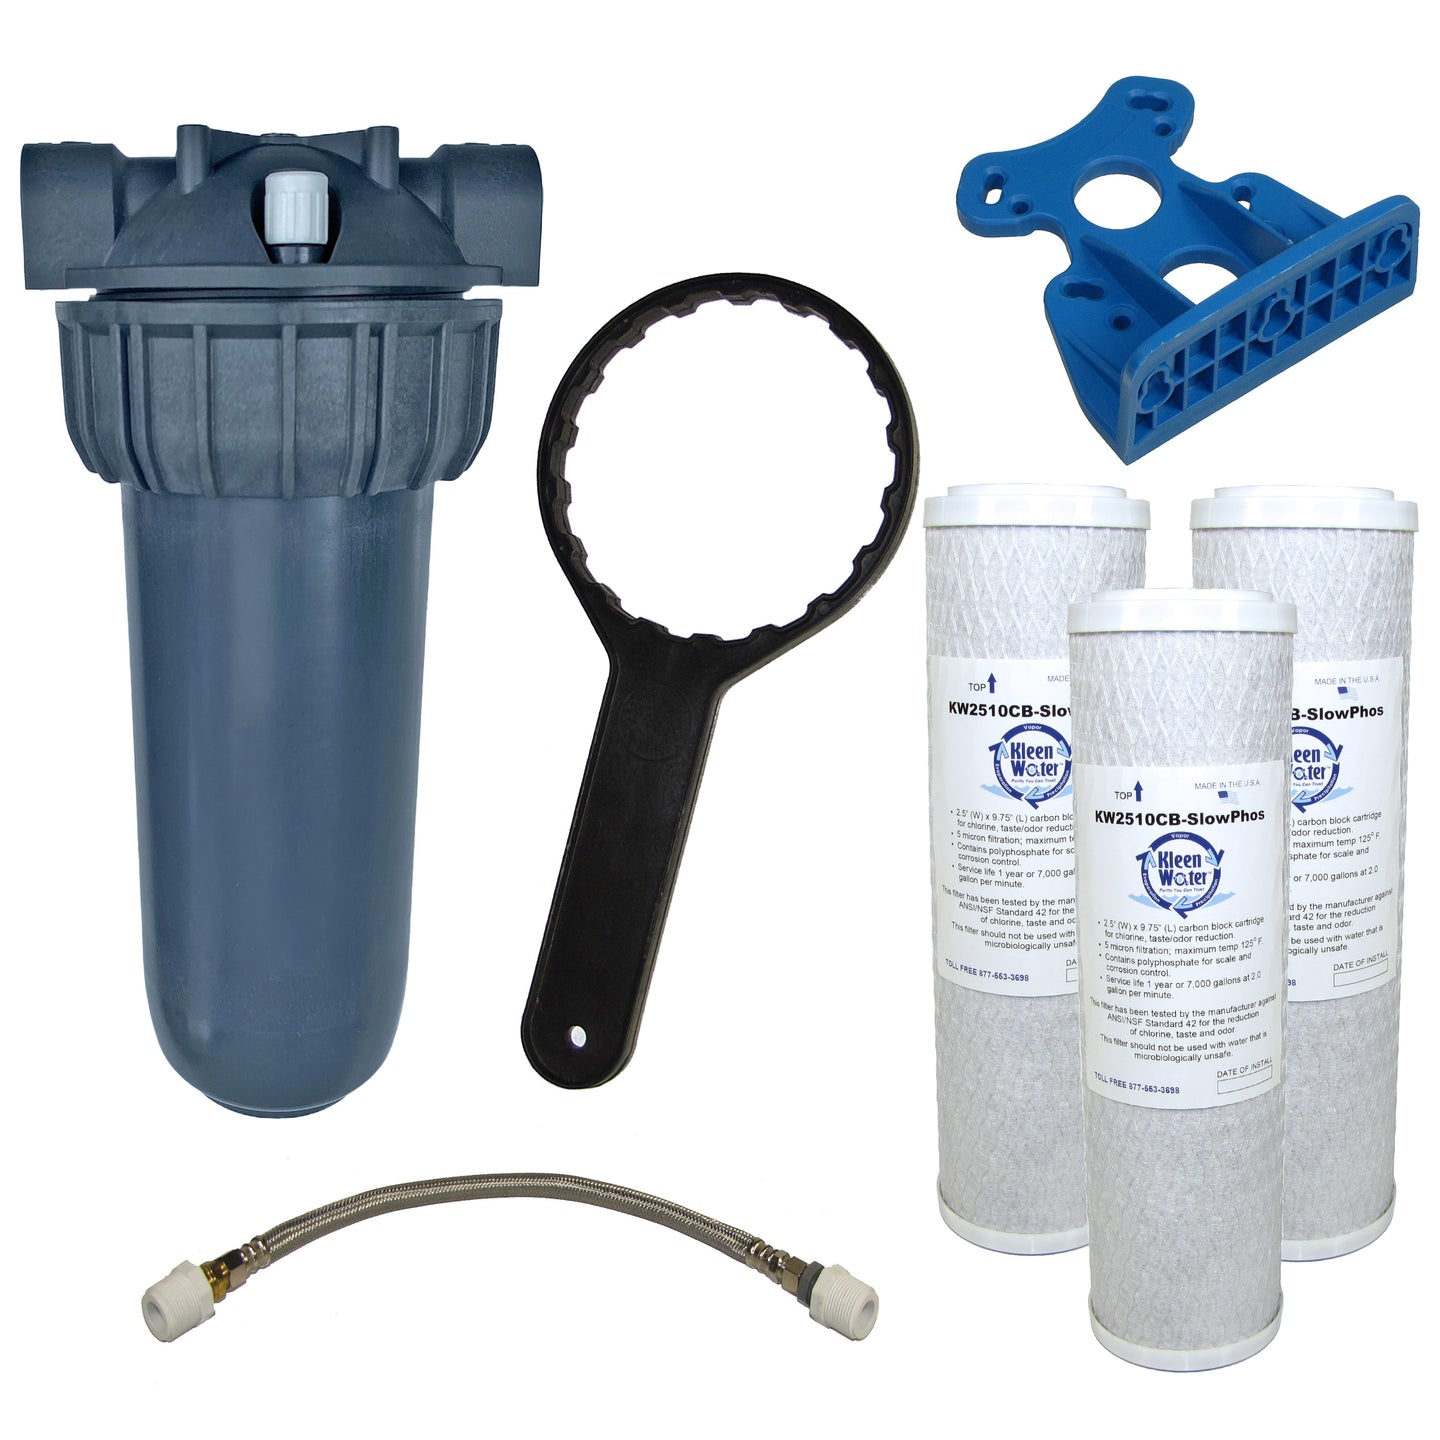 Under-Sink Hot Water Filtration System for Chlorine, Chemicals, Hardness, Scale and Sediment